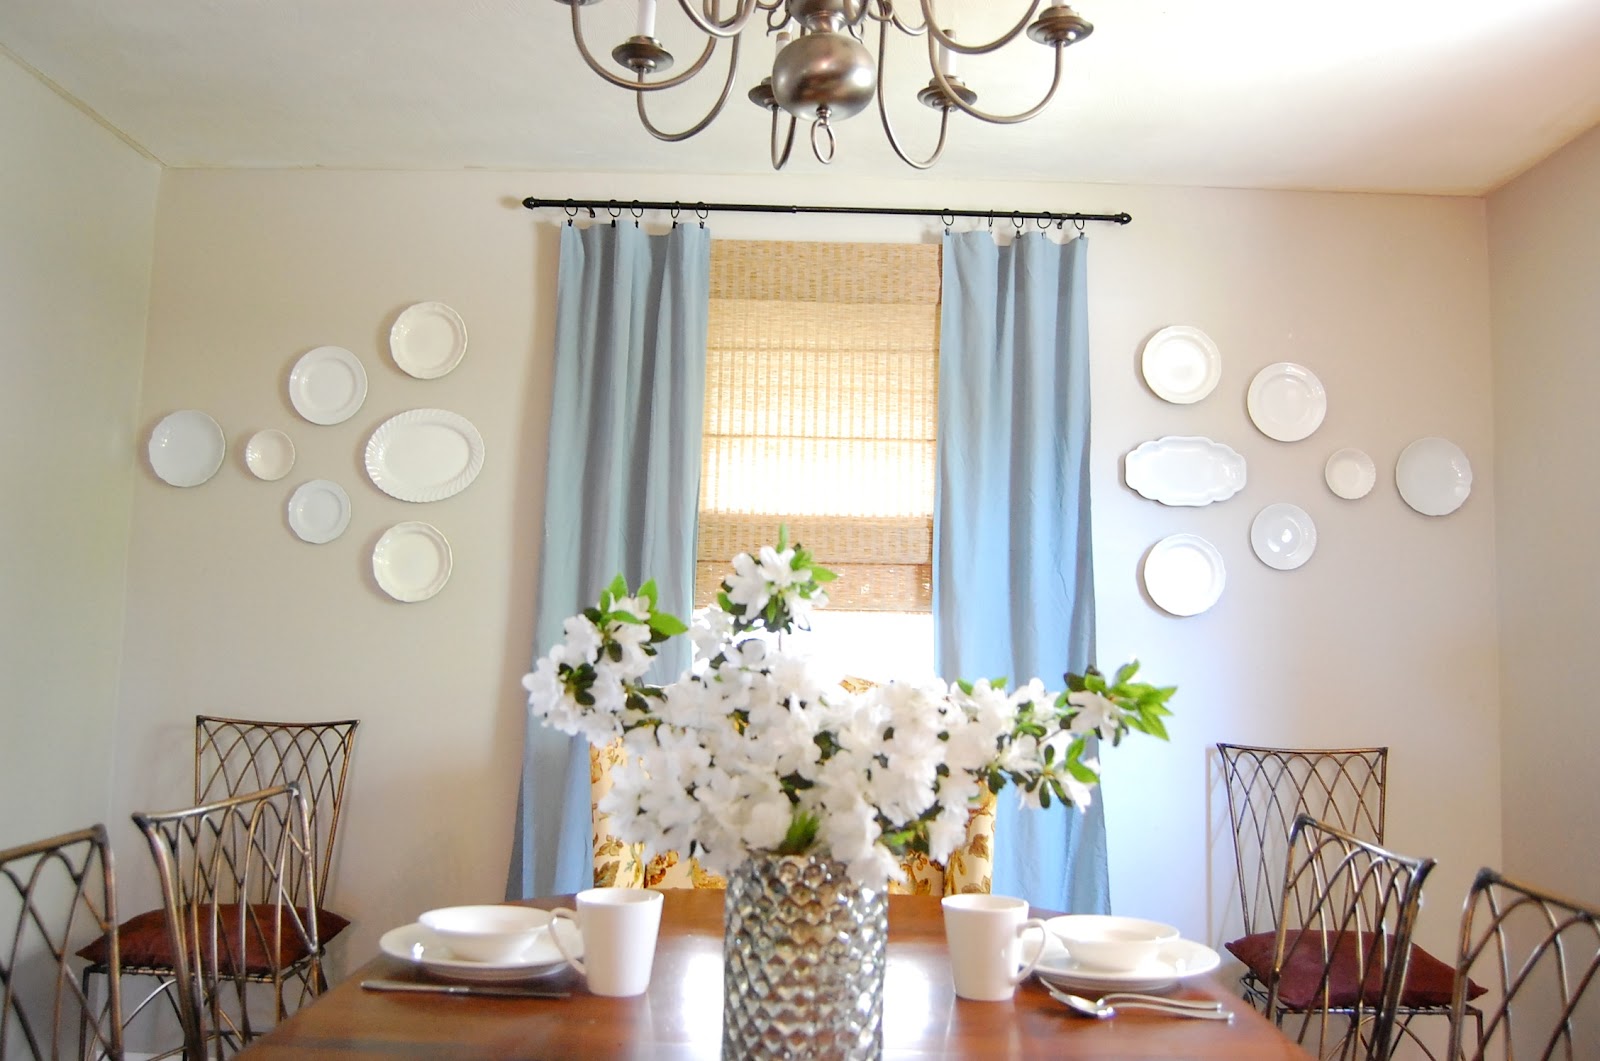  Dining  Room  Plate Wall  DIY Show Off  DIY Decorating 